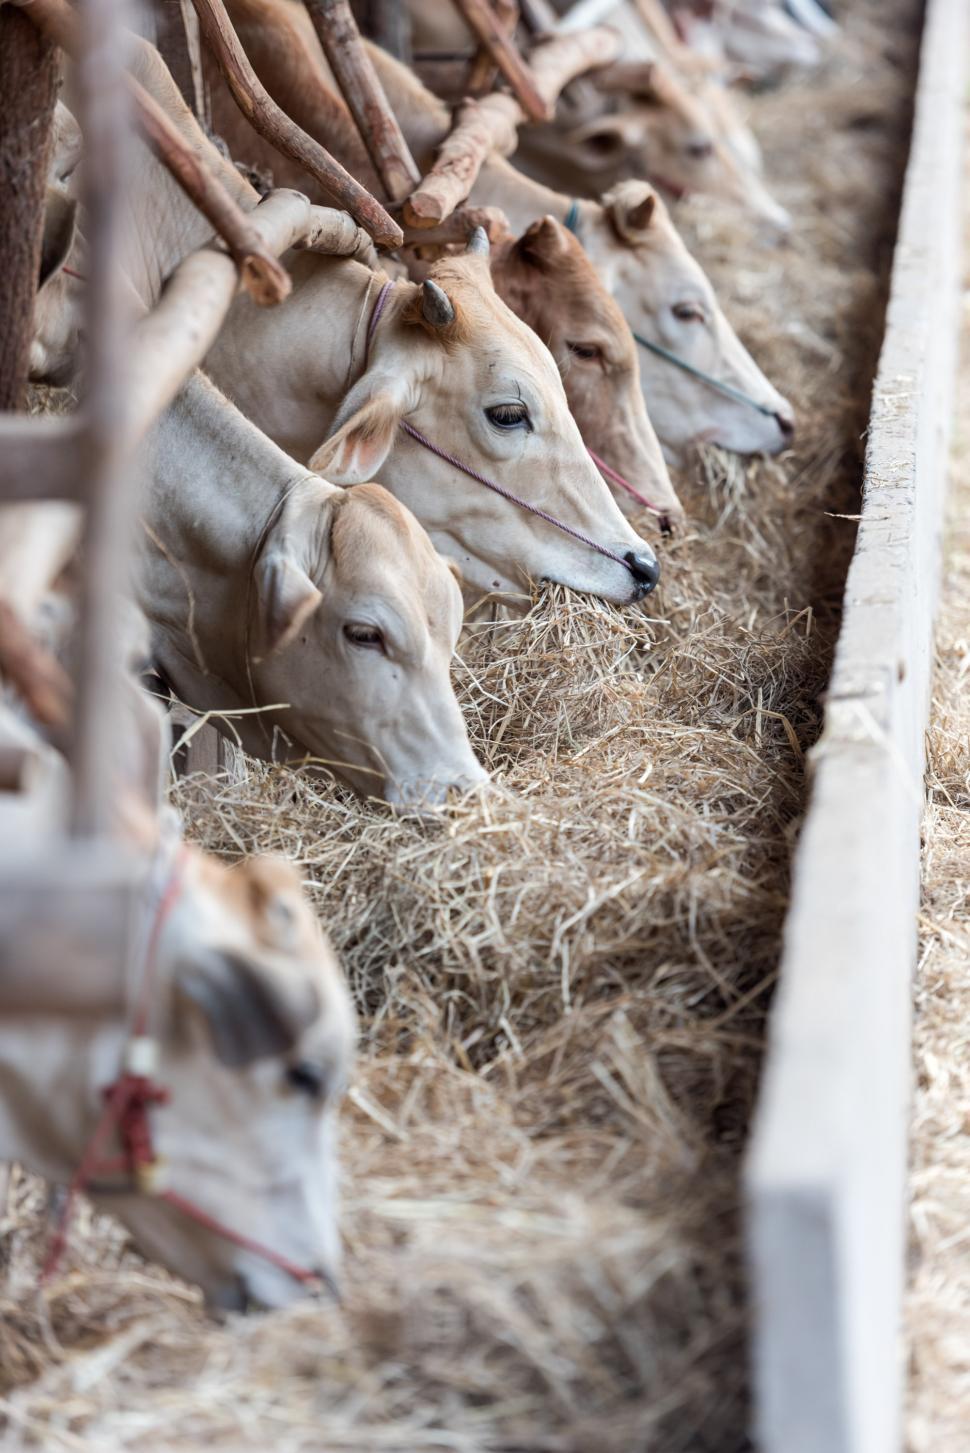 Free Image of Group of Cows Eating Hay in a Pen 